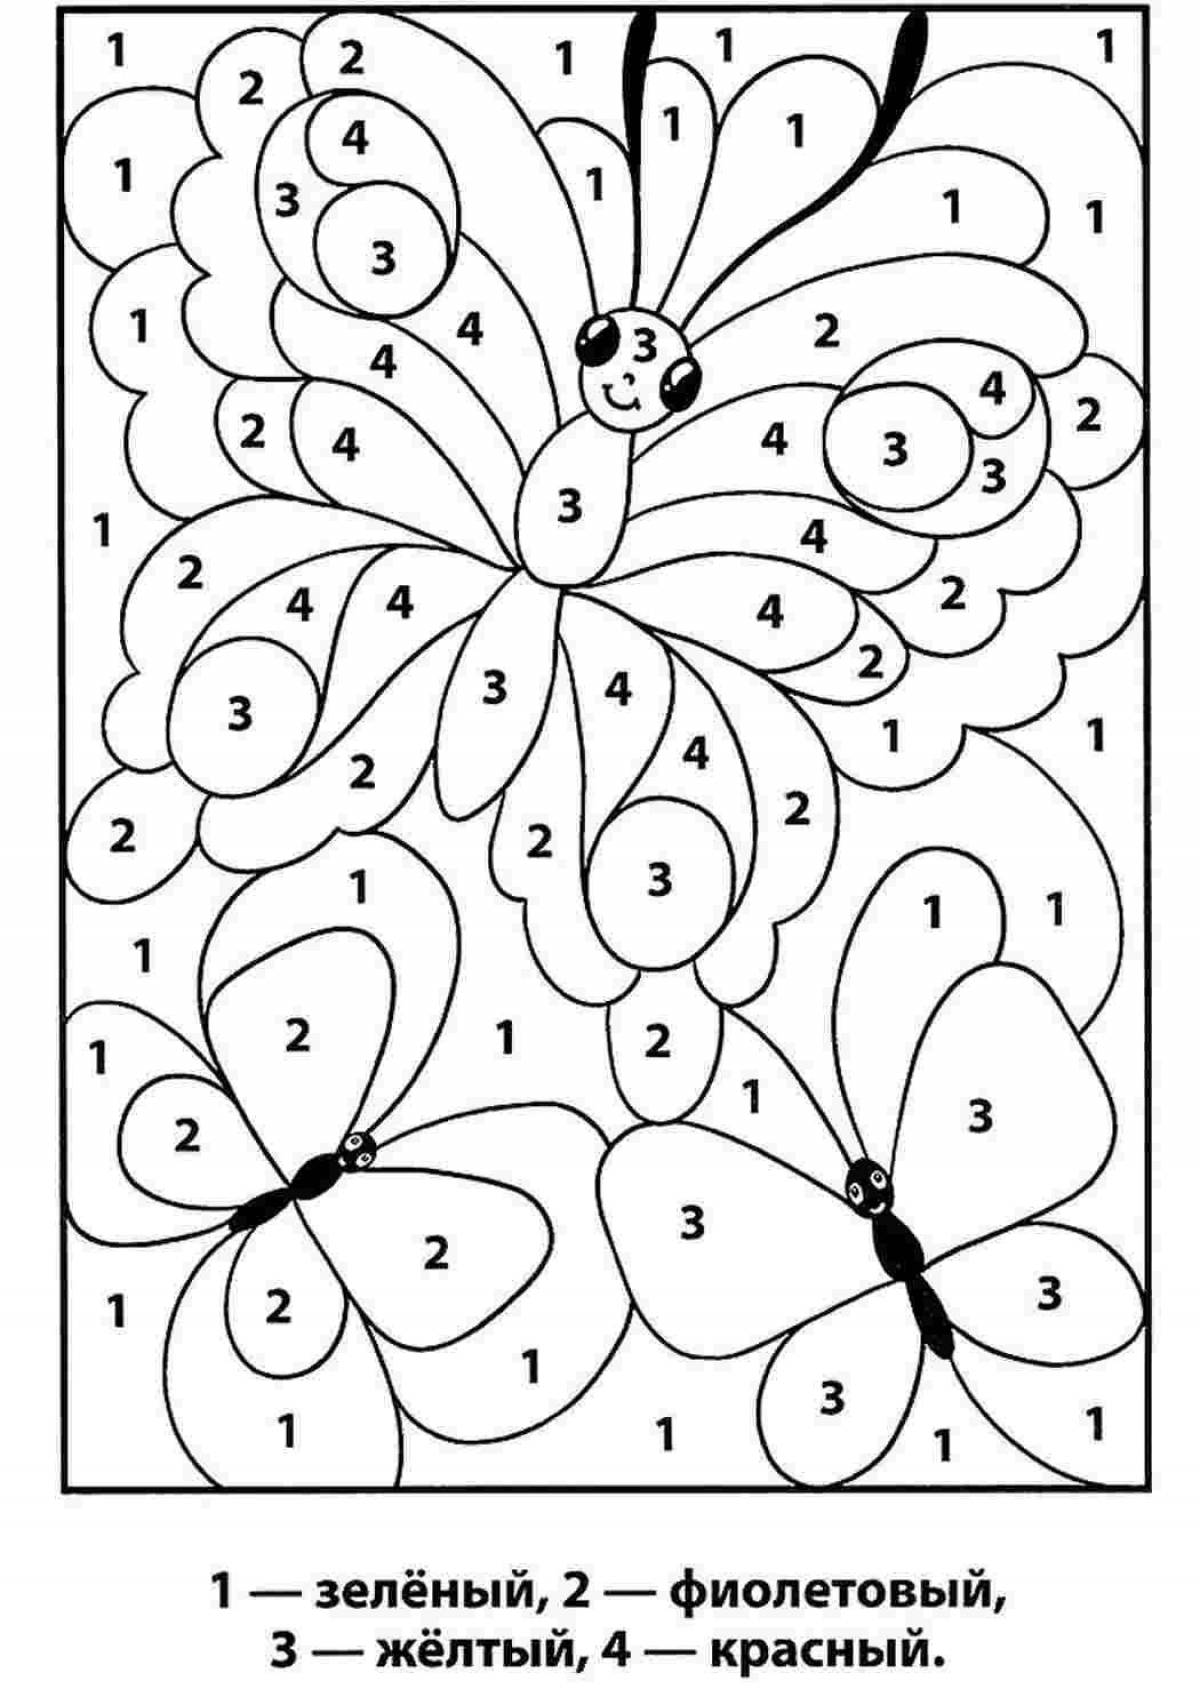 A fun coloring book for preschoolers with challenging tasks